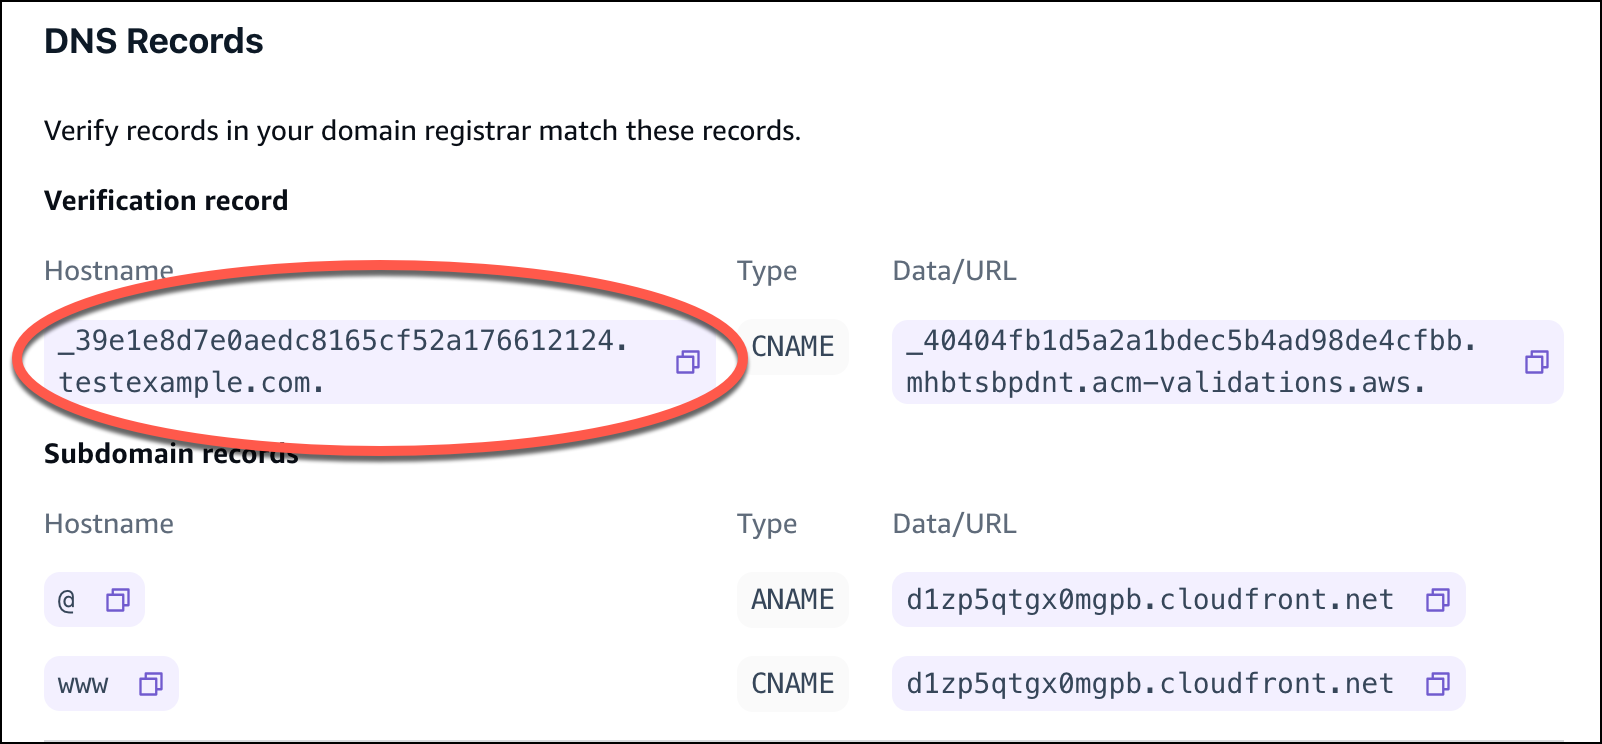 
                        Screenshot of the DNS records section in the Amplify console with
                           the Hostname verification record circled.
                     